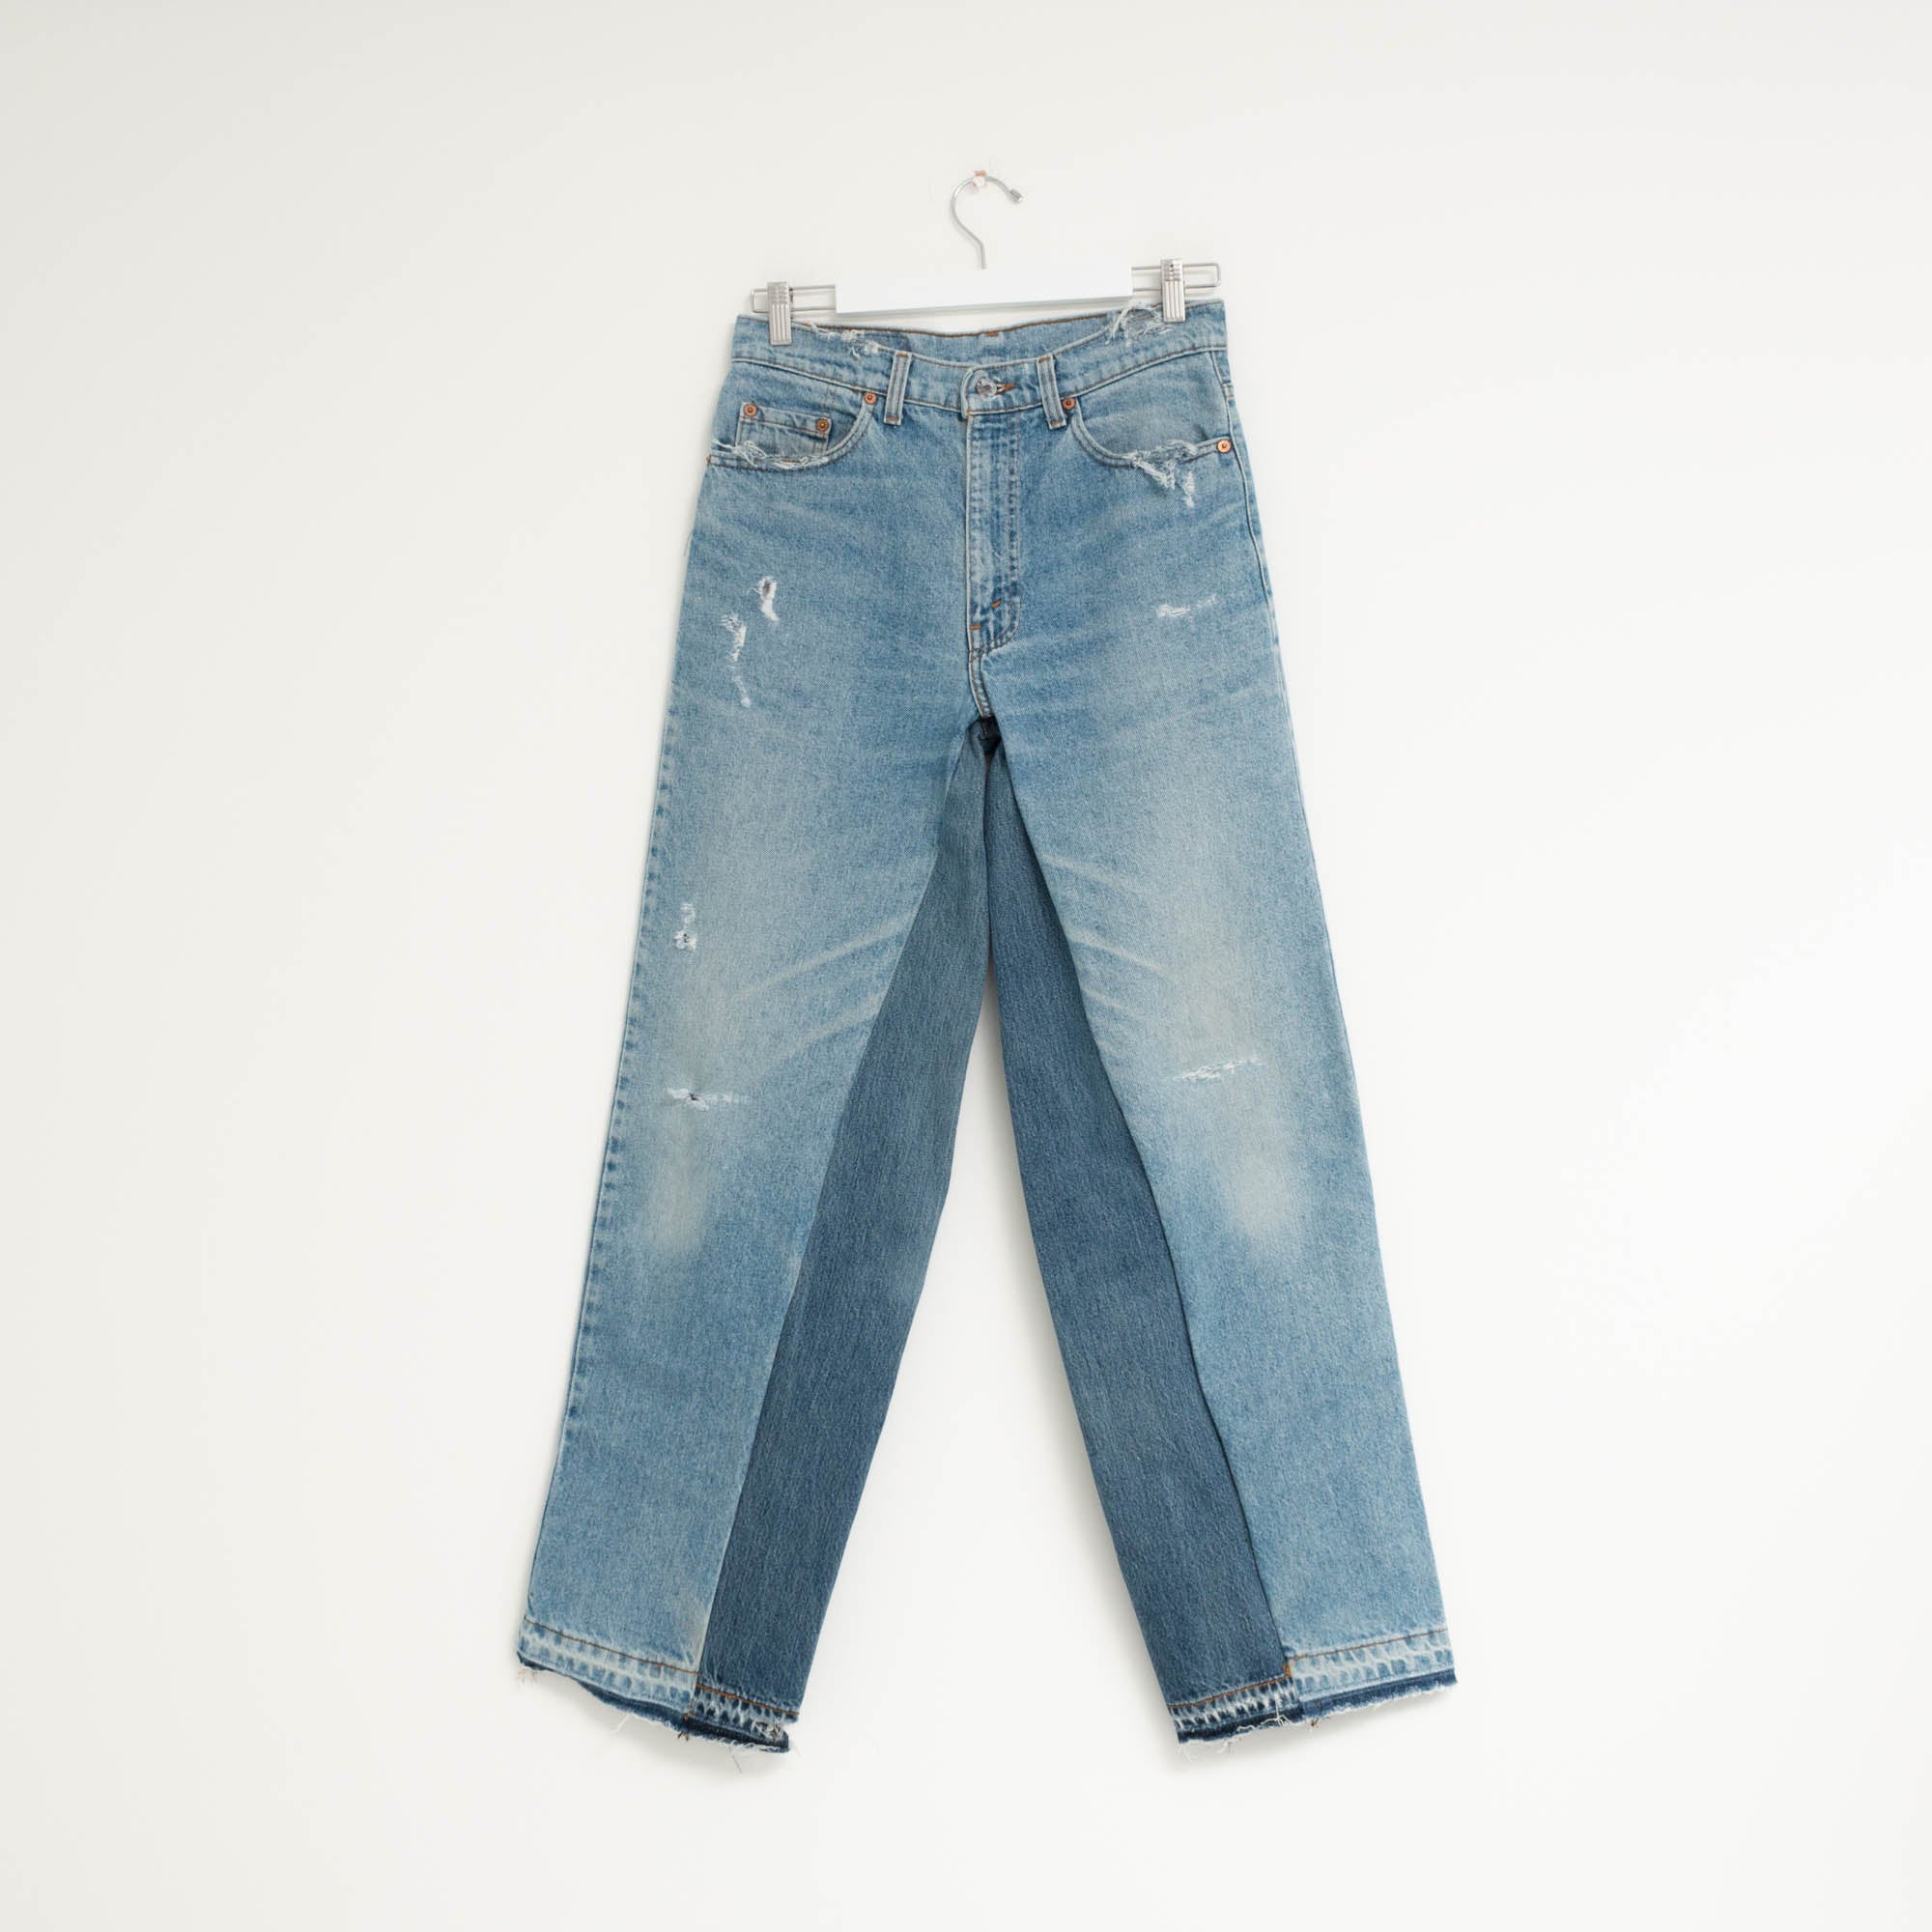 “FLARE” Jeans W31 L33